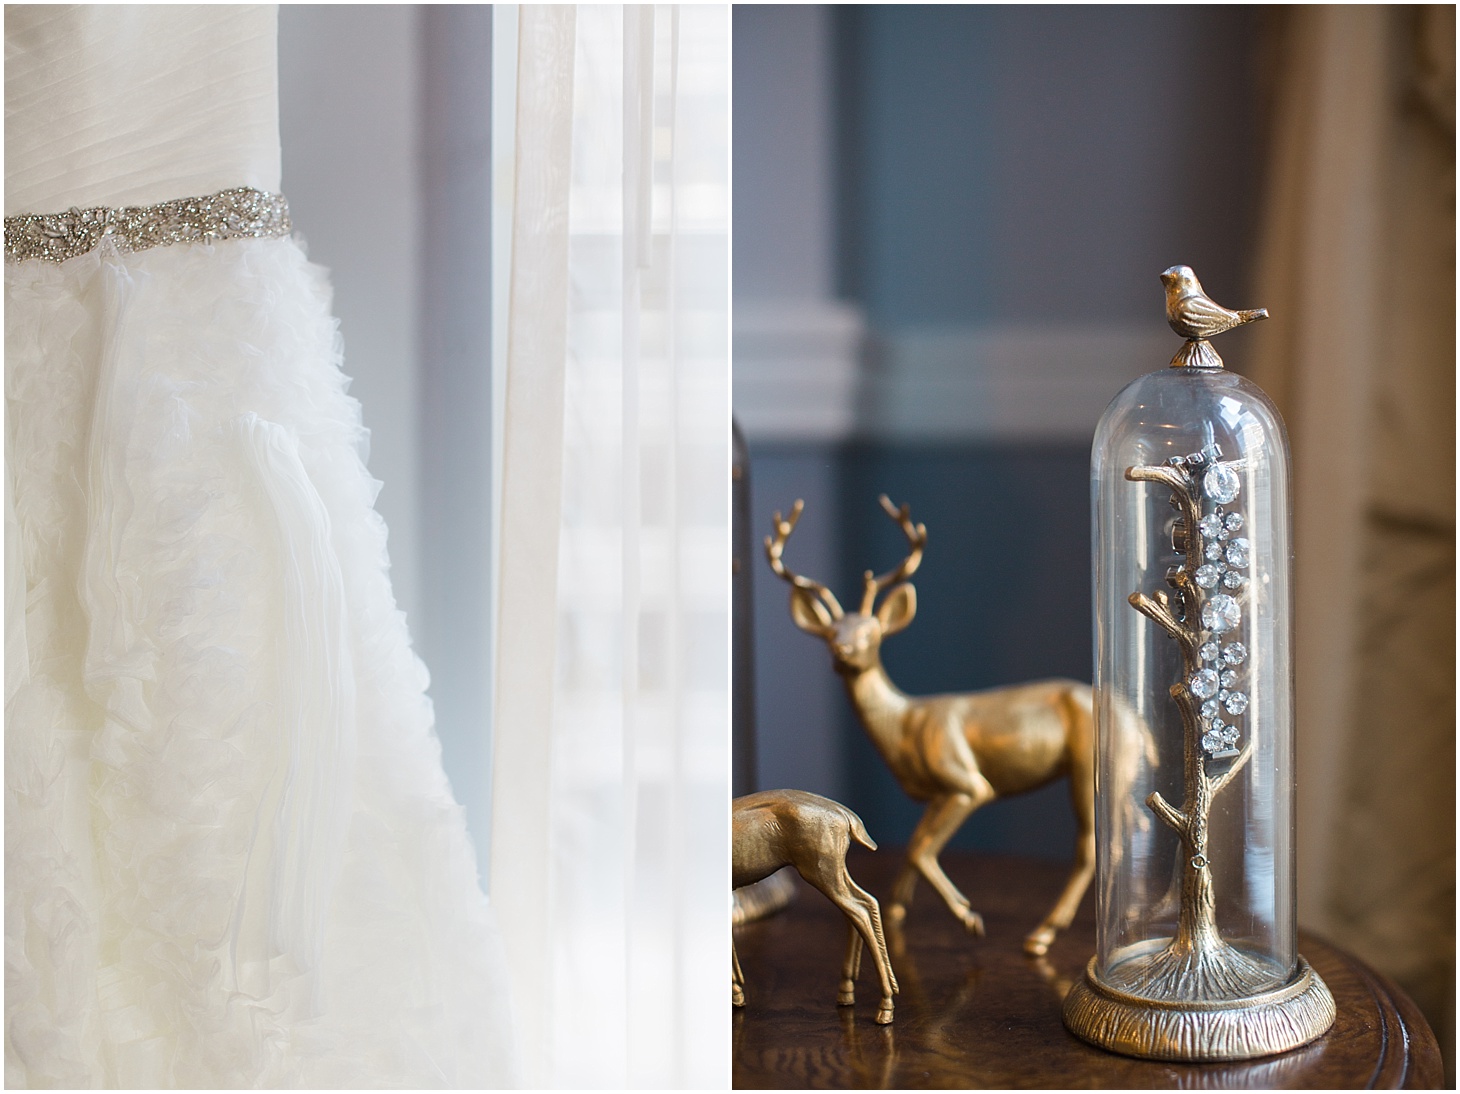 Madison James Wedding Gown Details and Sorrelli Bracelet | Luxe Winter Wedding at the Army and Navy Club | Sarah Bradshaw Photography | Washington DC Wedding Photographer